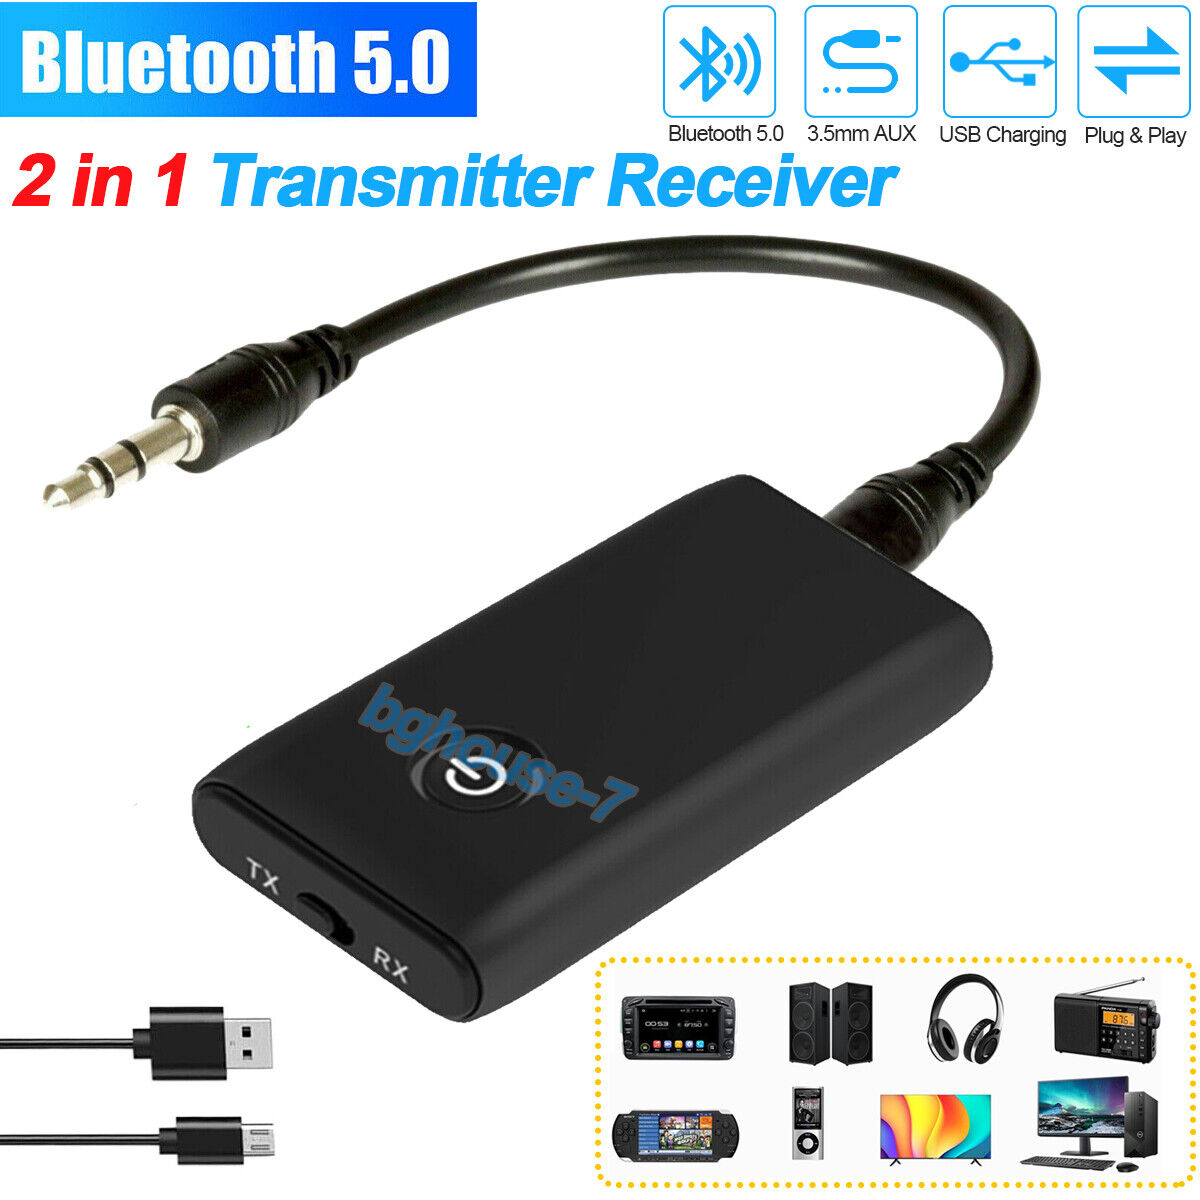 Bluetooth 5.0 Transmitter Receiver 2 in 1 Wireless Audio 3.5mm Jack Aux Adapter